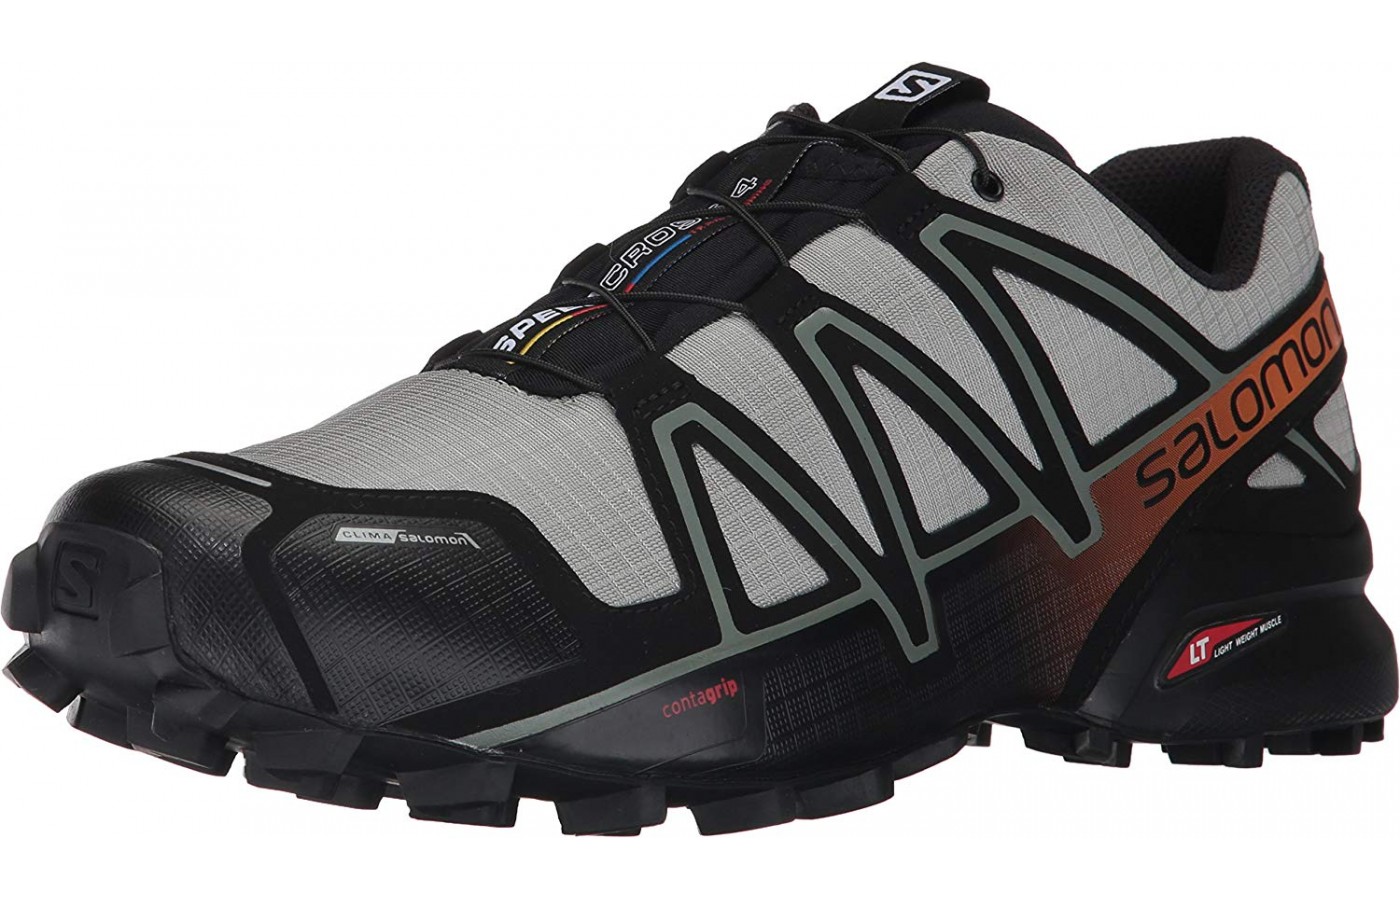 The front/side view of the Salomon Speedcross 4 